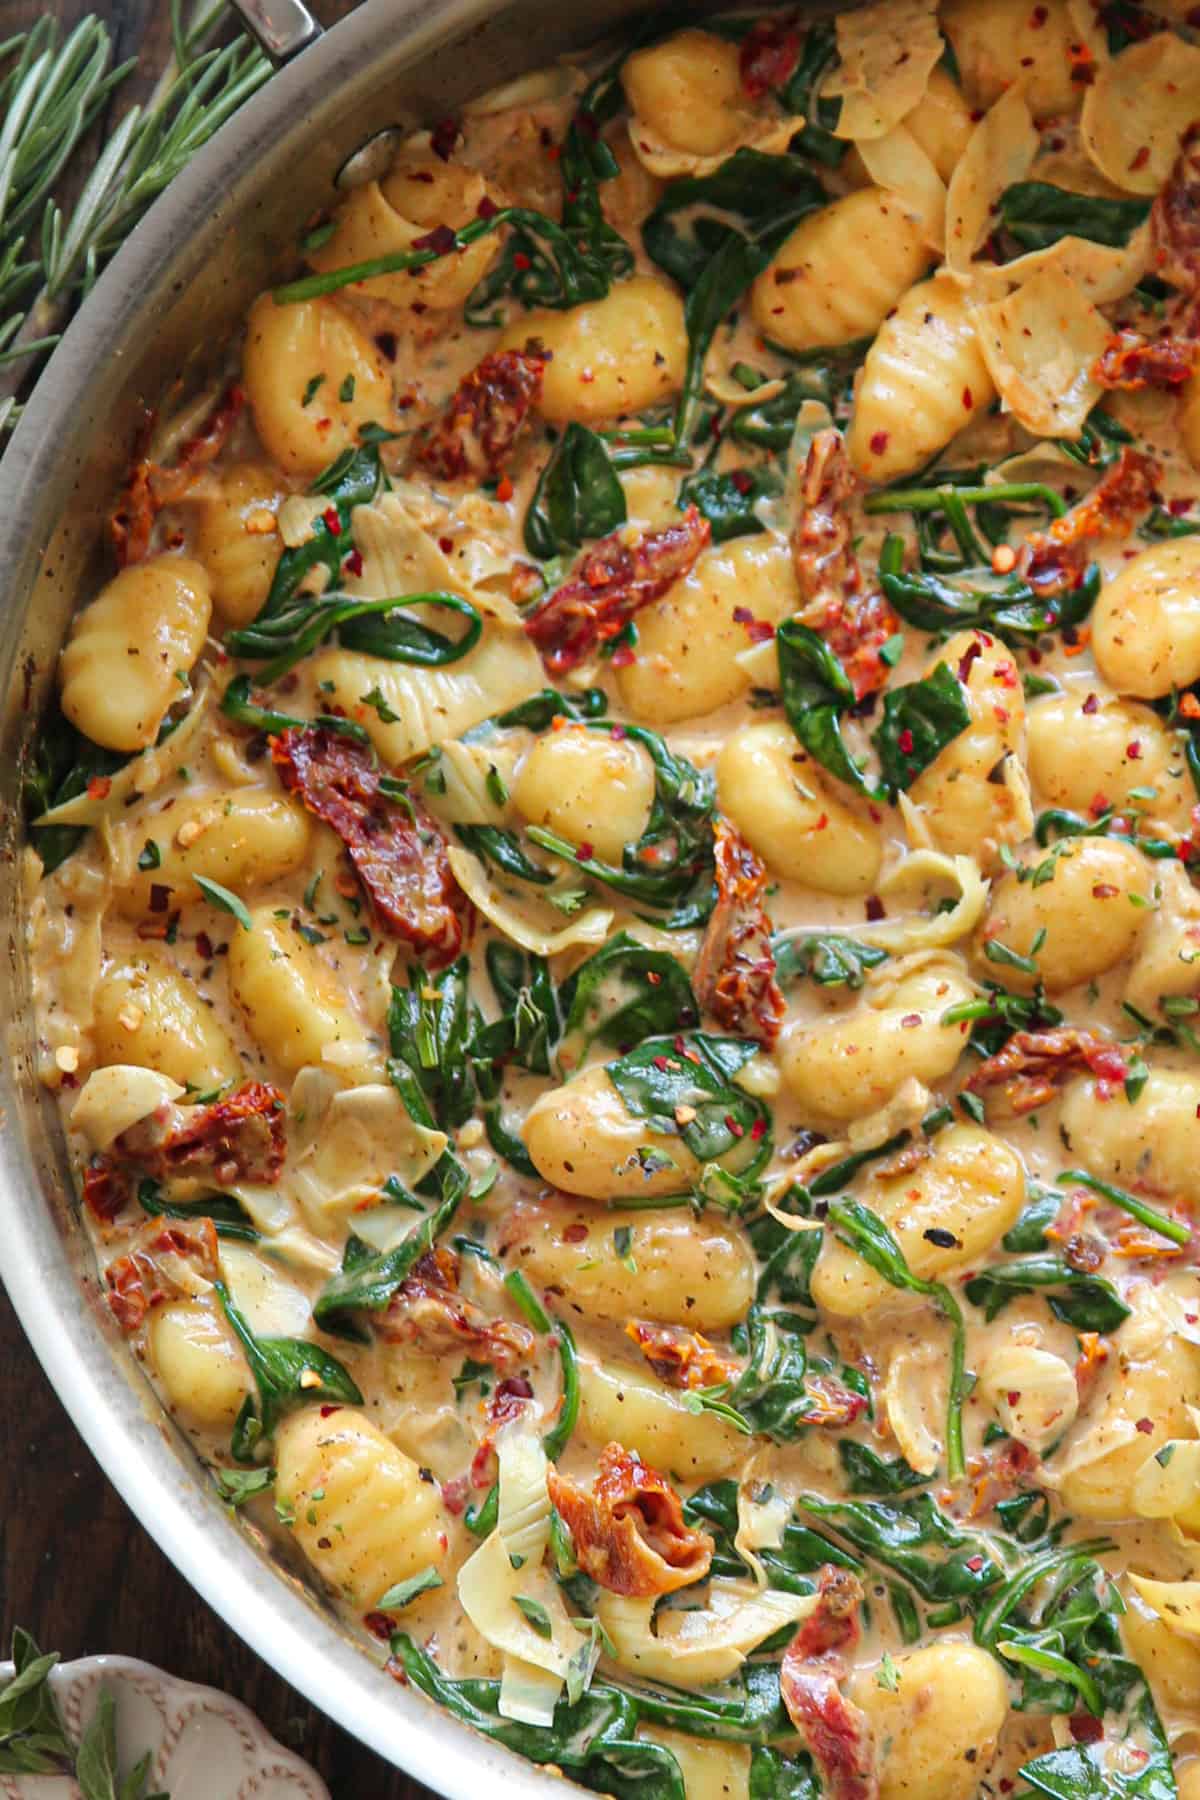 Creamy Tuscan Gnocchi with sun-dried tomatoes, spinach, and artichokes - in a stainless steel pan.